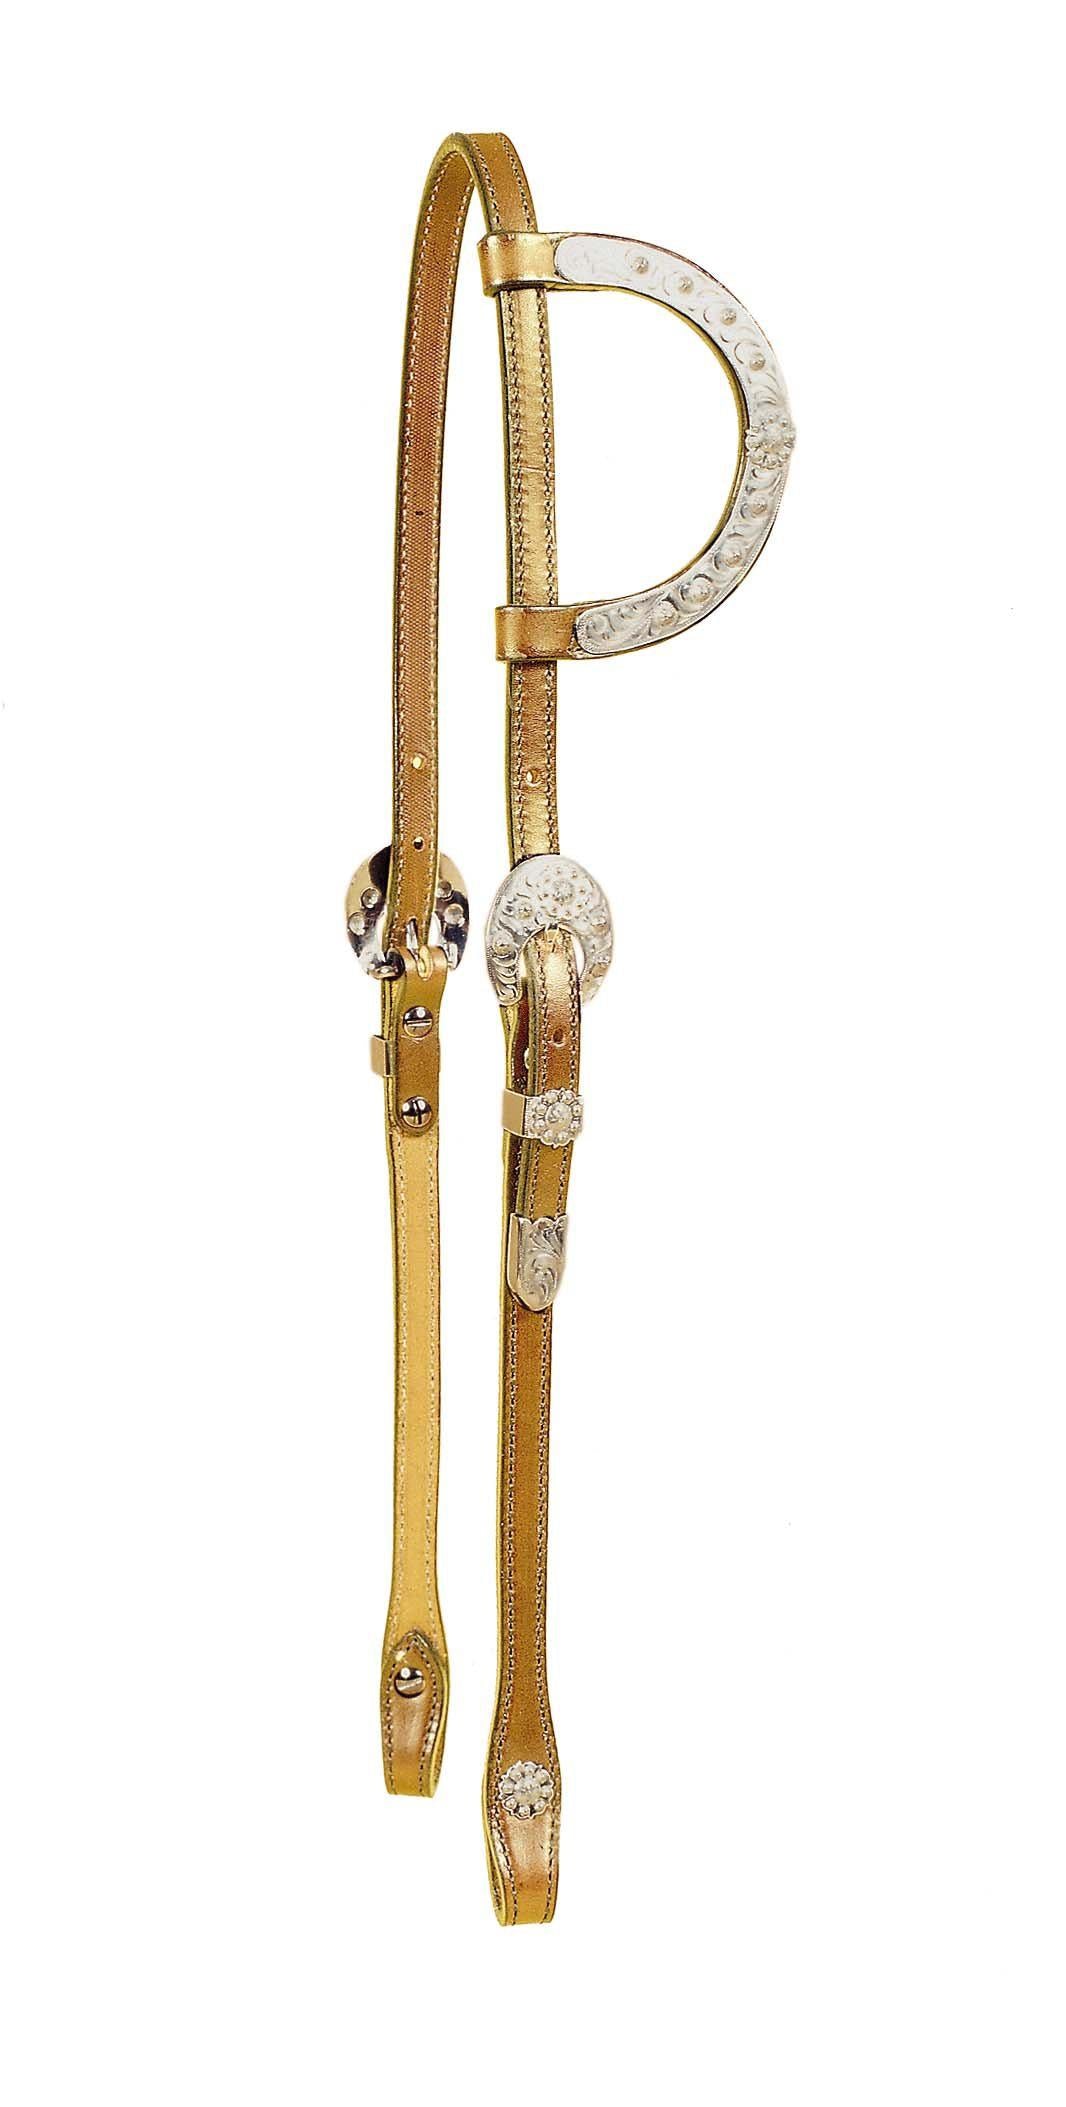 Tory Leather San Diego Berry One Ear Show Headstall - West 20 Saddle Co.